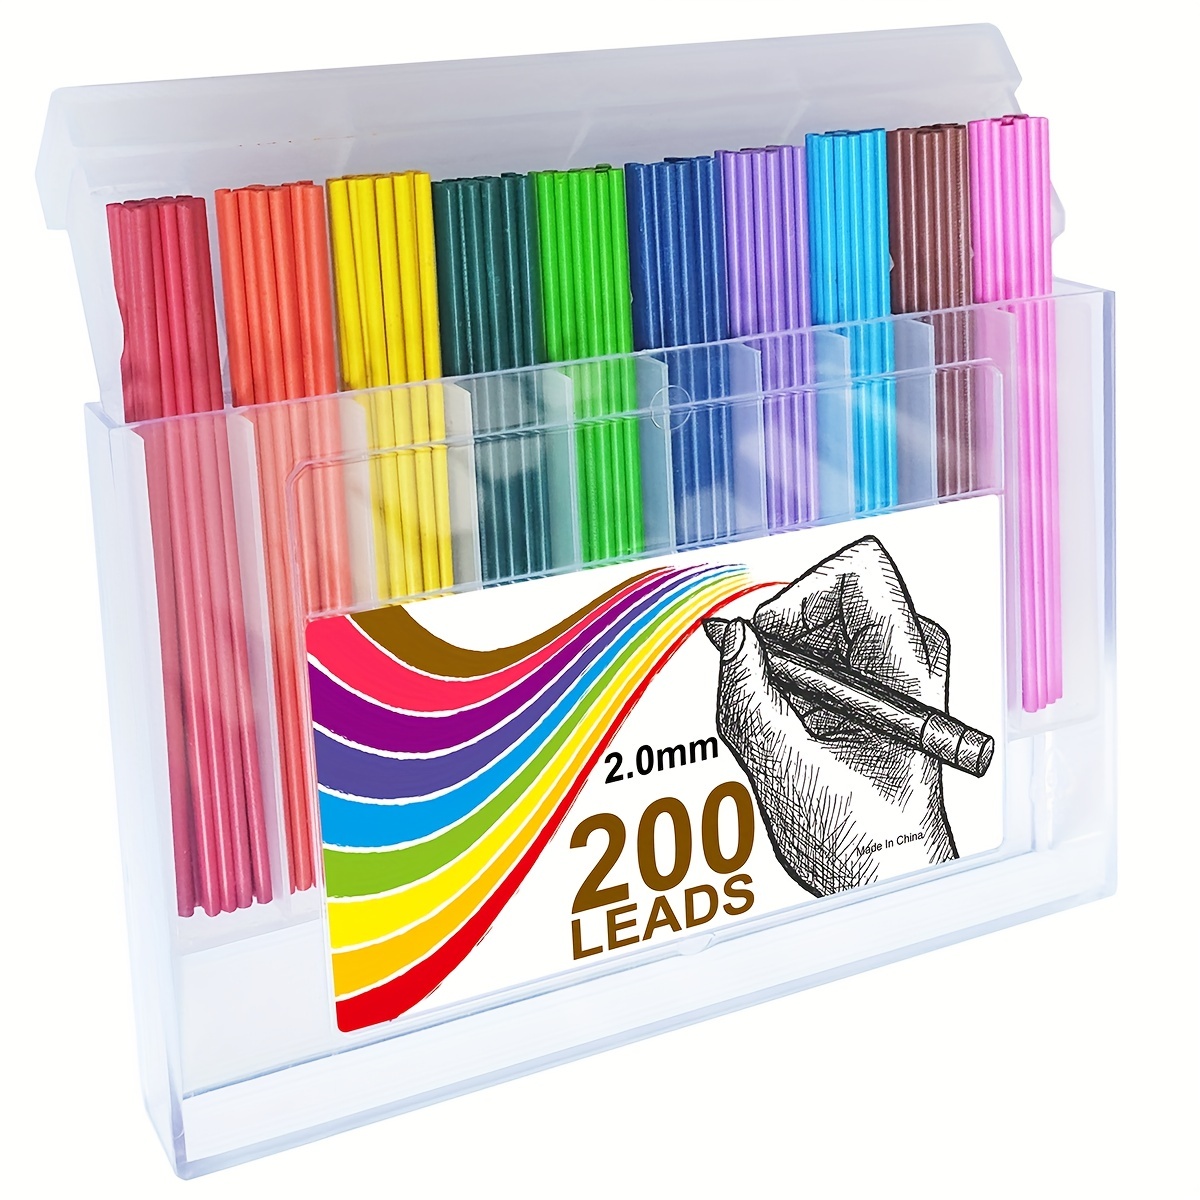 

Colored Lead Pencils 2.0mm 10 Unique Colored Pencils Lead Set For Hand Drawing Sketch Art Graffiti Anime Hand Drawing